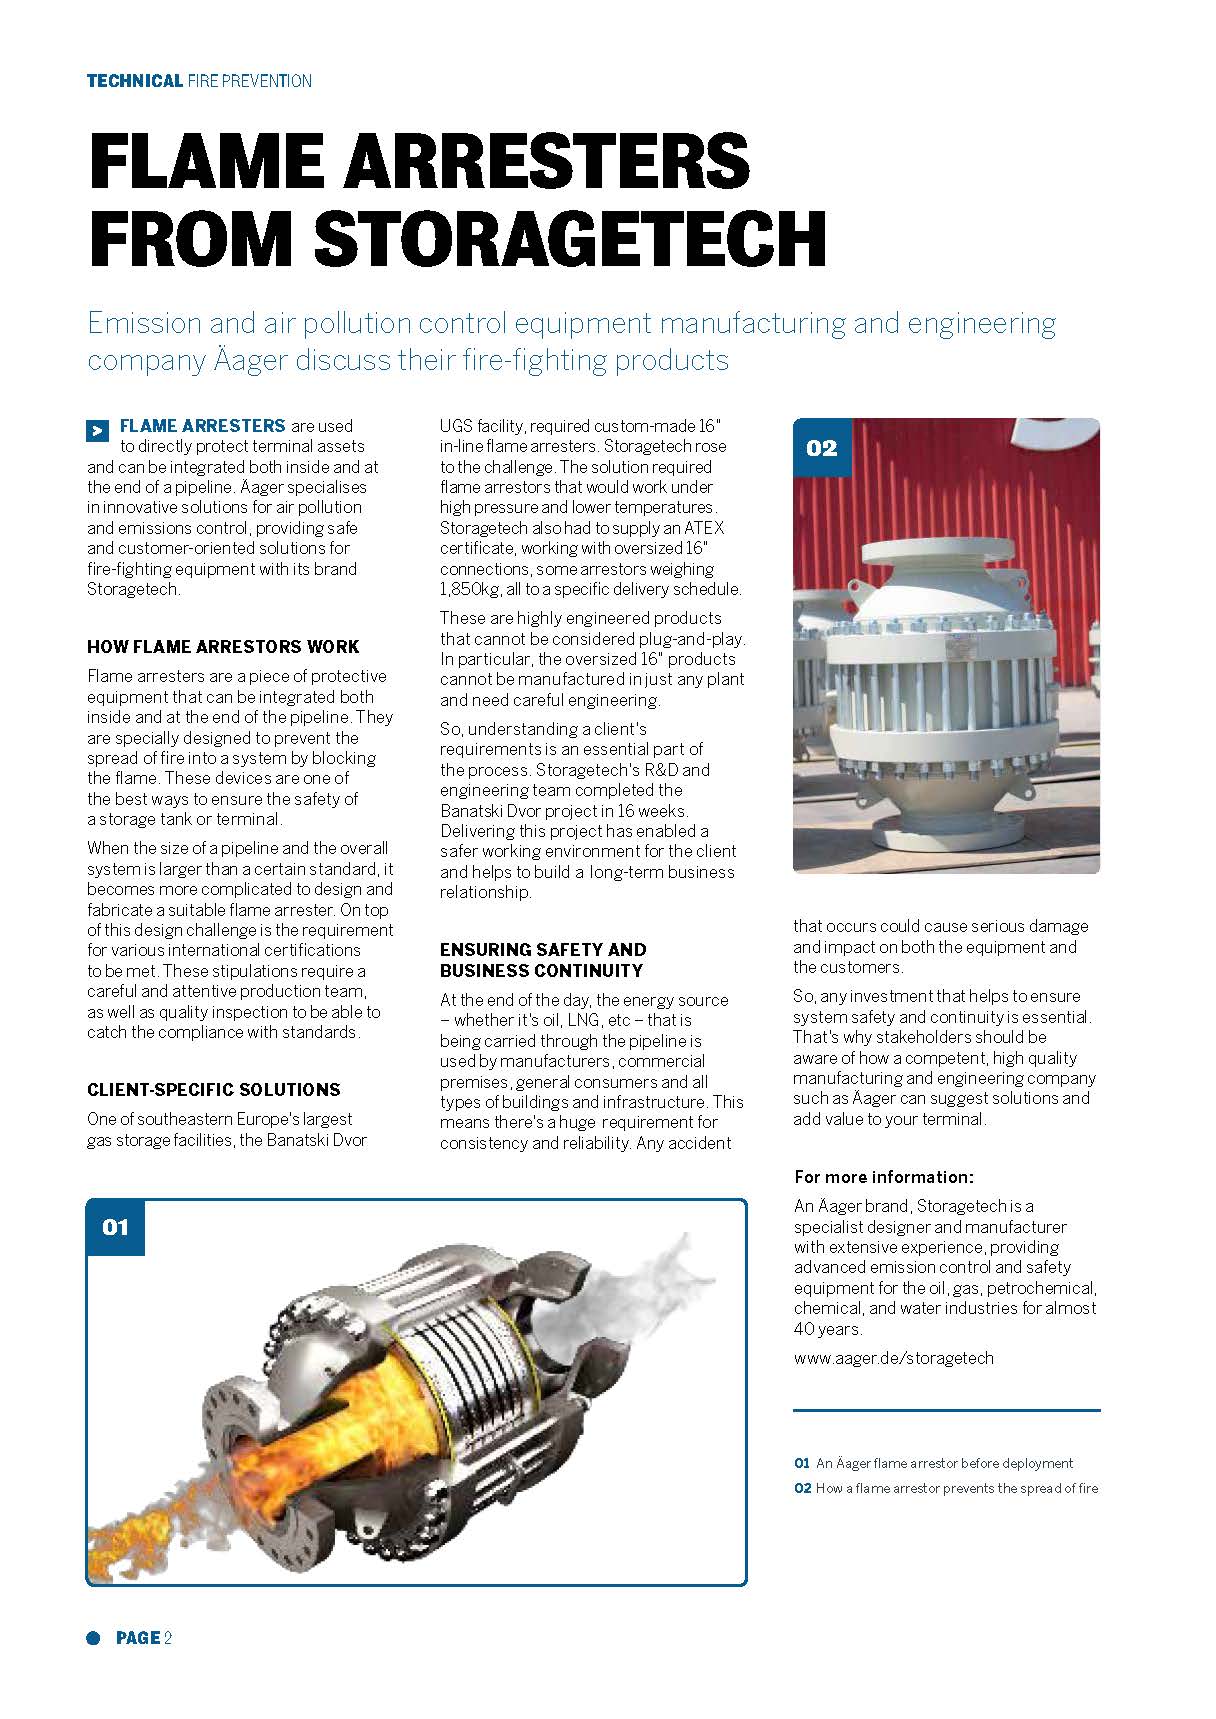 Customer-Oriented Flame Arresters from Storagetech – Tank Storage Magazine Article 43